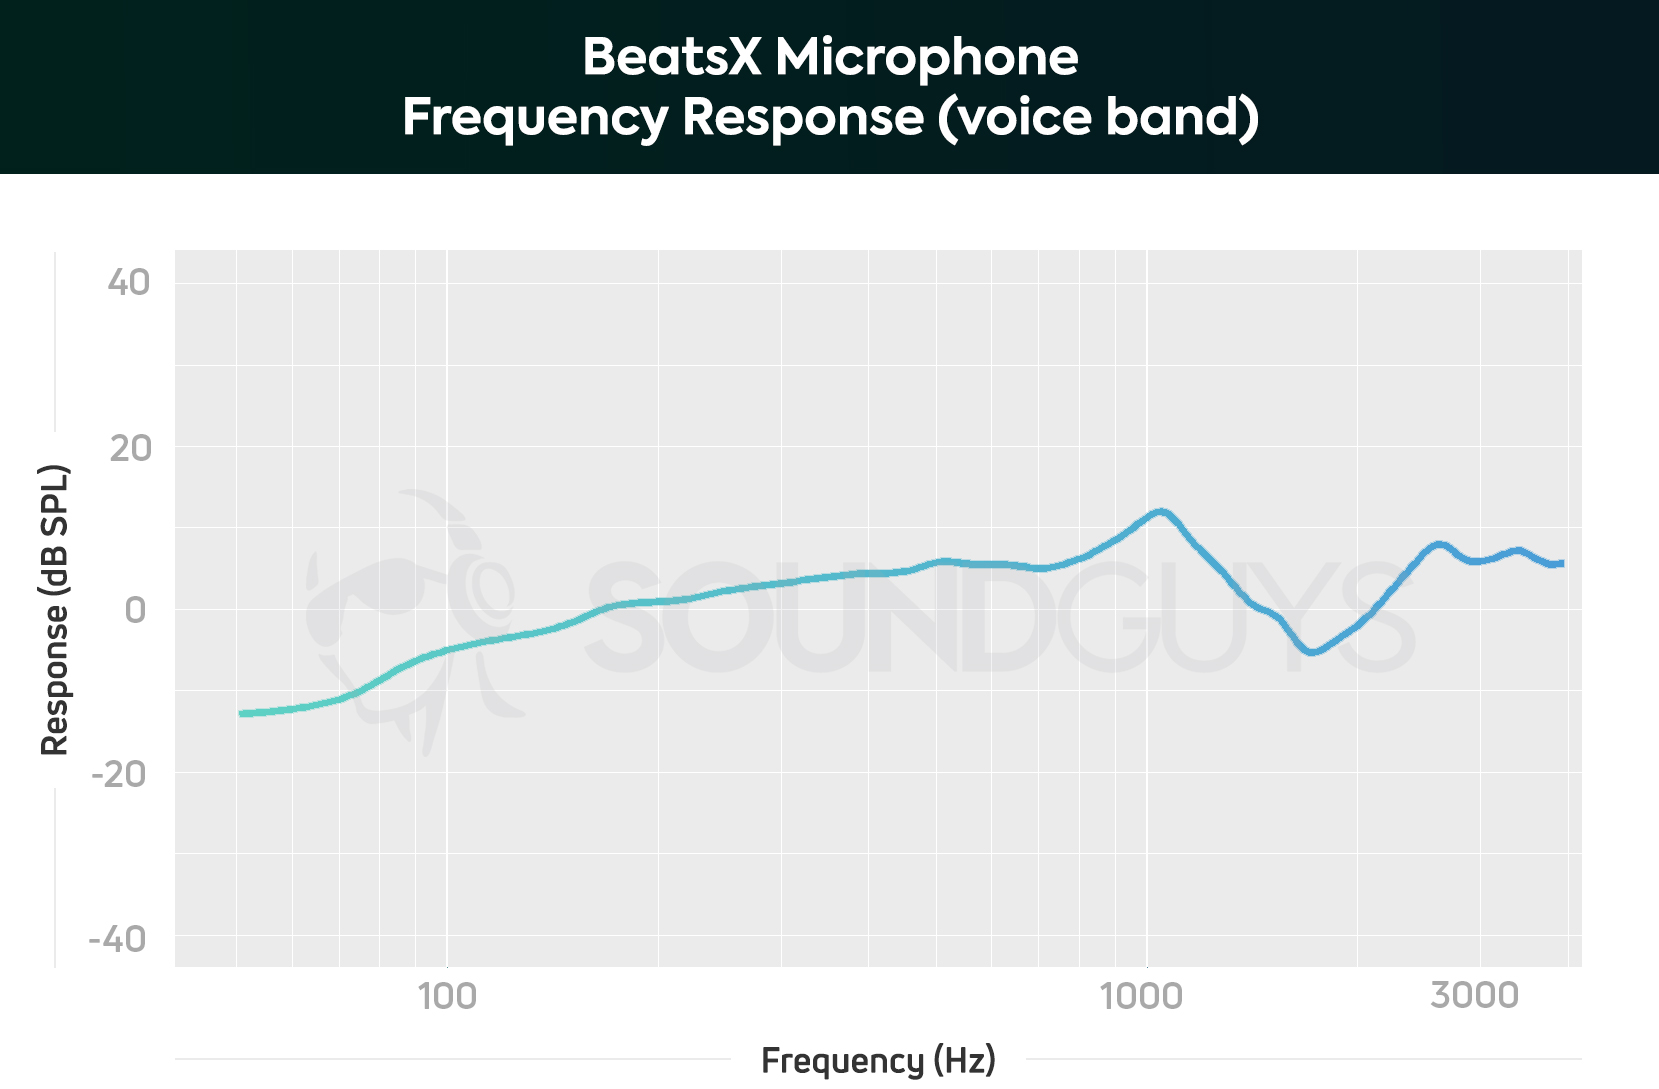 BeatsX frequency response chart for the microphone, limited to the human voice band.